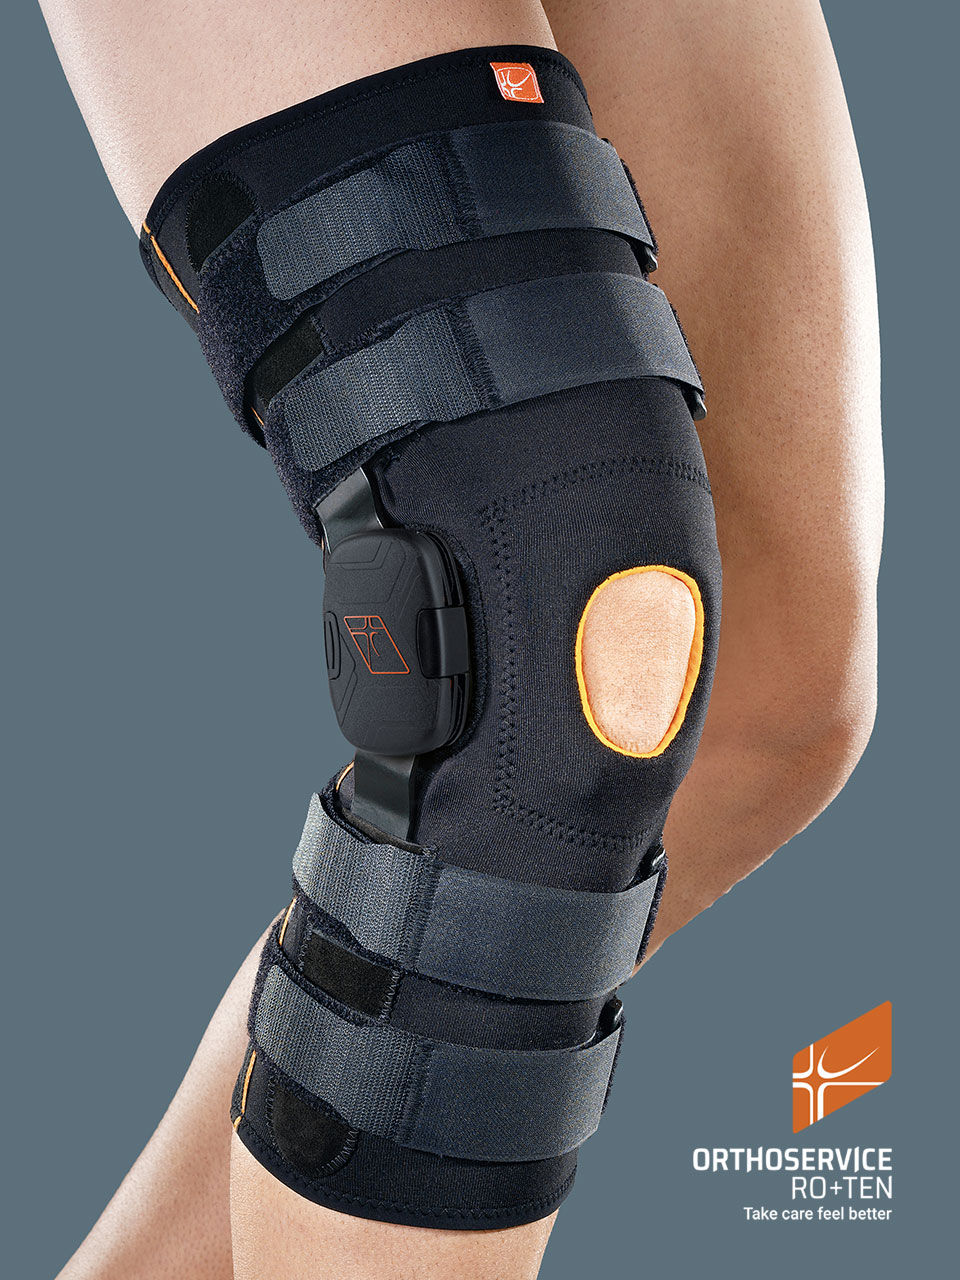 Functional Knee Stabilizer Knee Support, 15 To 75 Years, Sizes